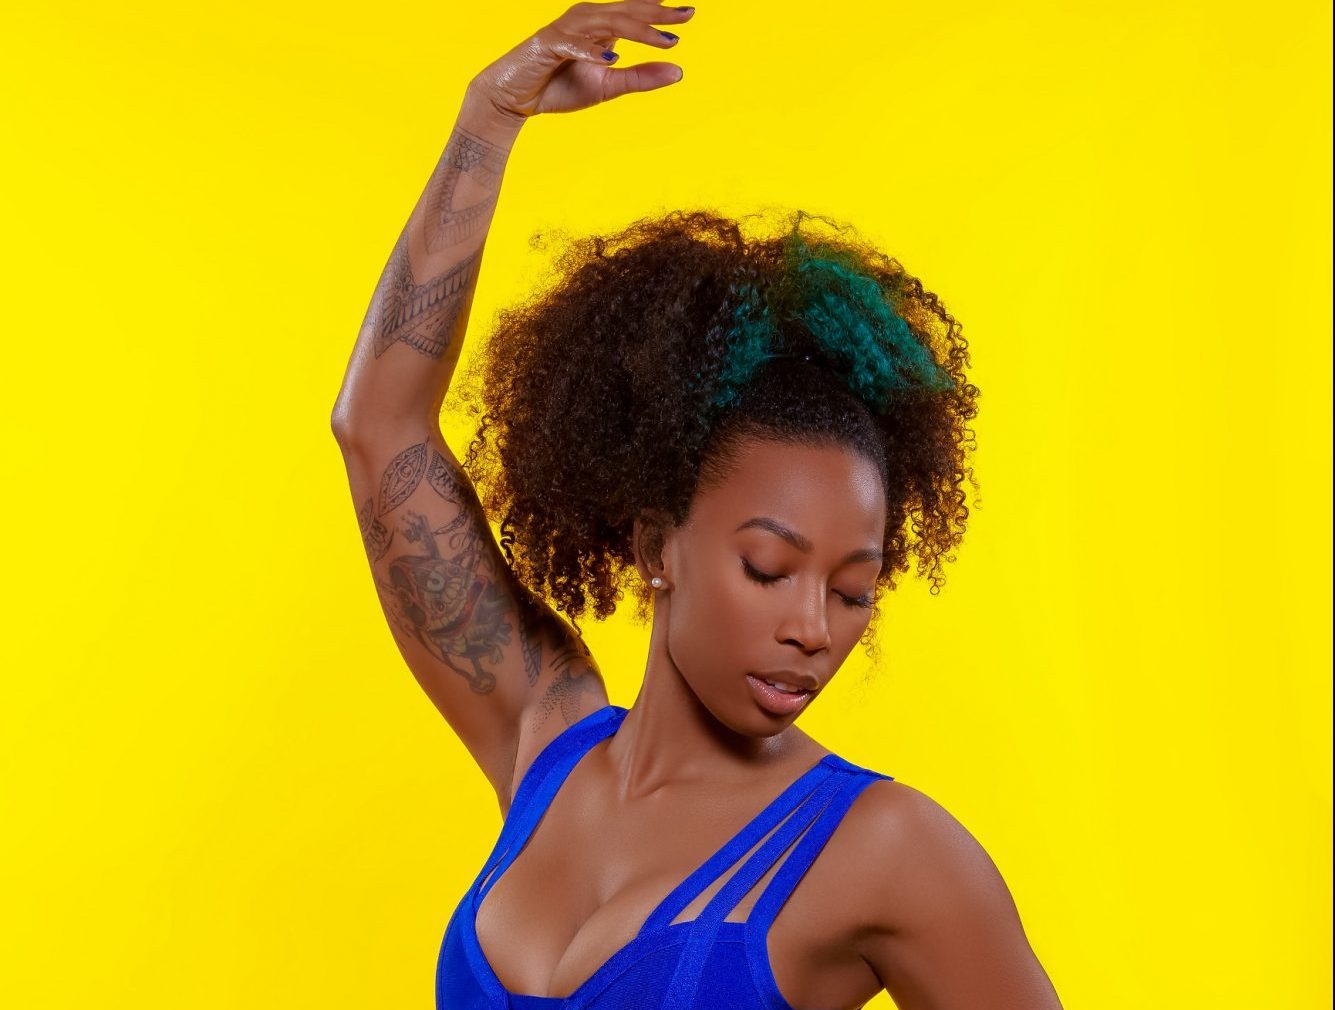 Britteny Floyd-Mayo on Instagram: The Trap Yoga Bae Experience is back and  better. Pull up on my intimate soft opening this week. There were only 30  spots and now we are down